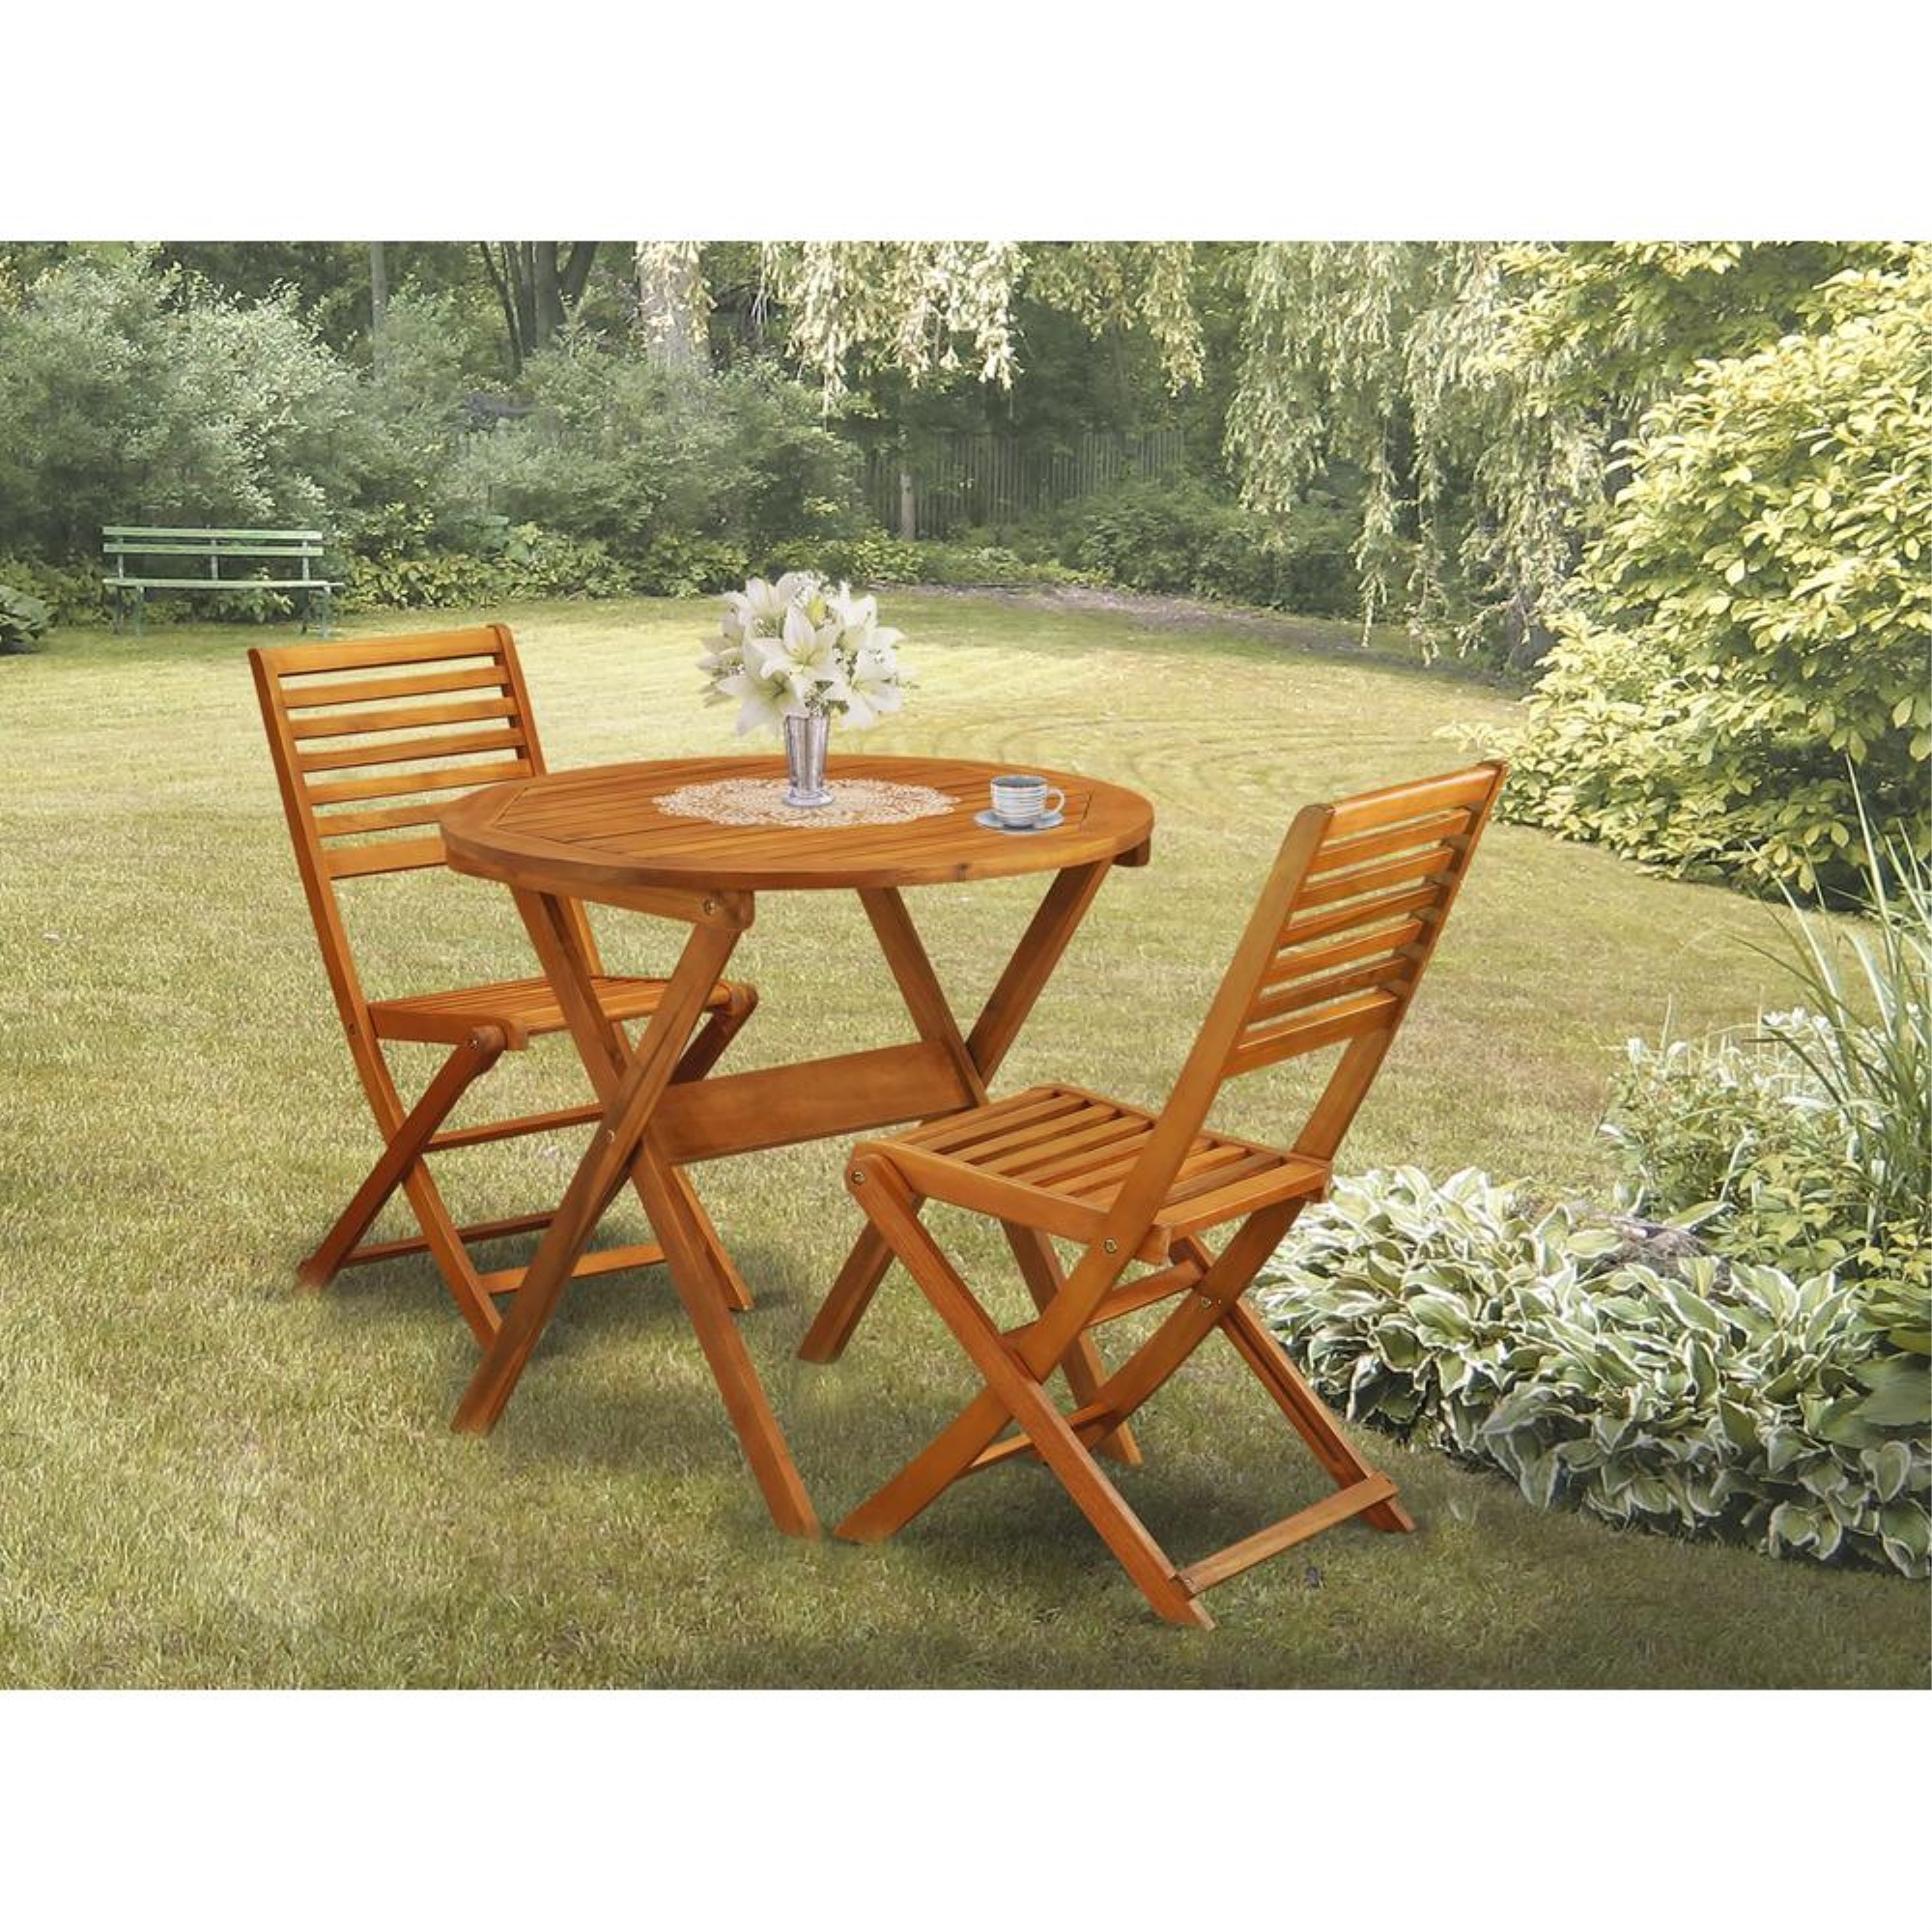 East West Furniture 3-Piece Folding Patio Set Contains a Folding Patio Table and 2 Outdoor Bistro Chairs Suitable for Garden, Terrace, Bistro, and Porch - Natural Oil Finish - image 1 of 6